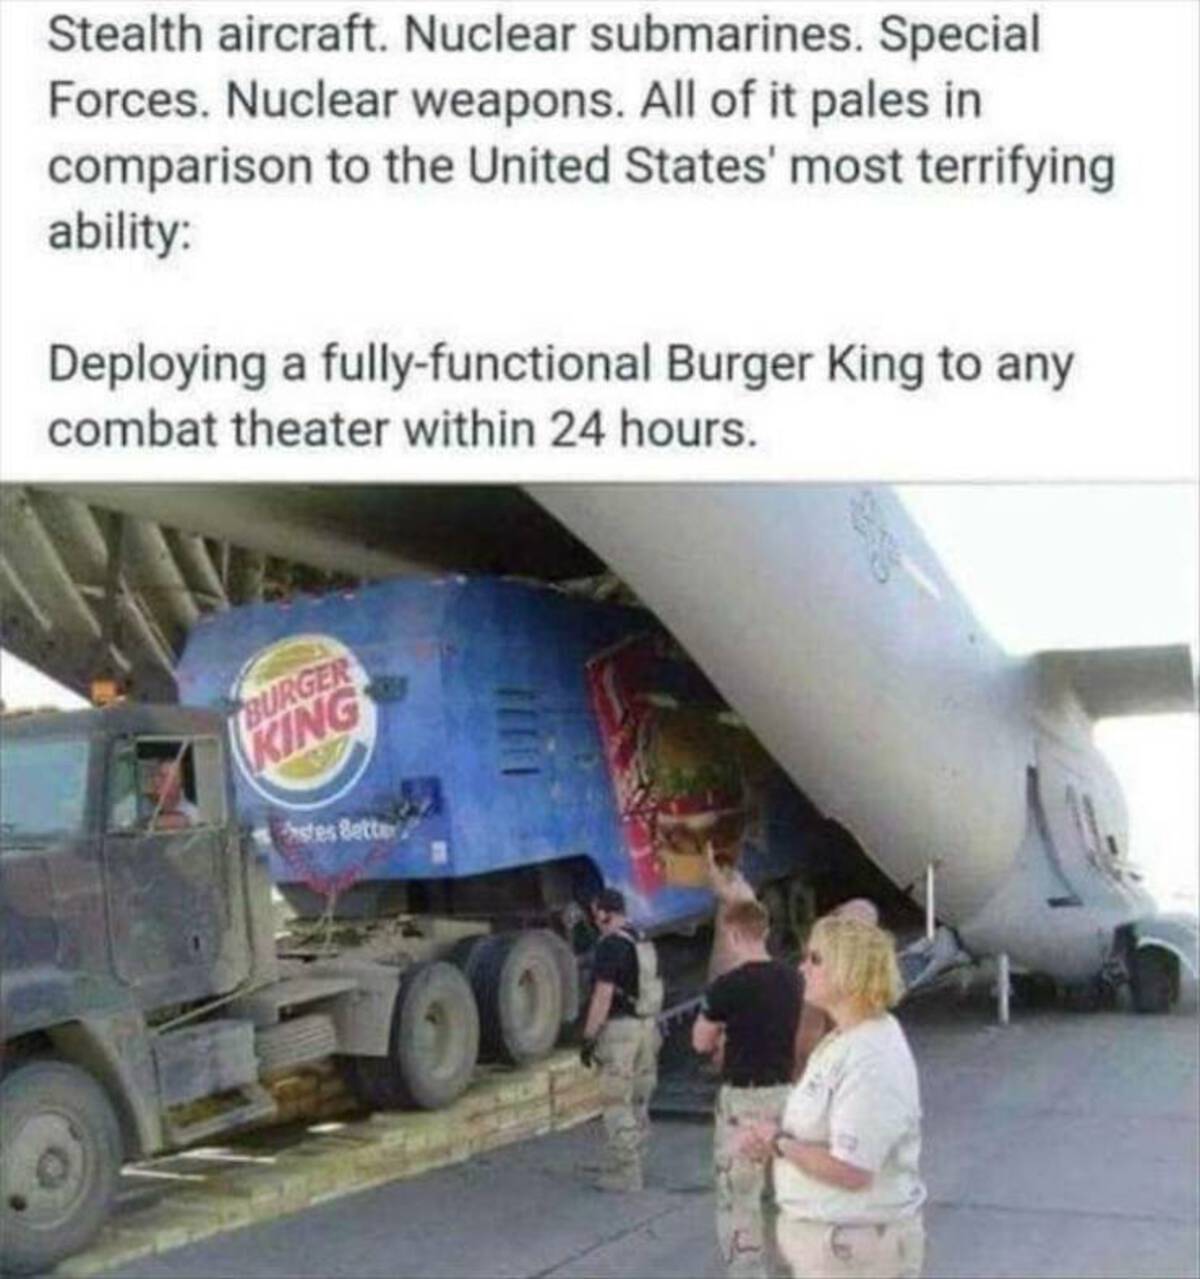 burger king airlift - Stealth aircraft. Nuclear submarines. Special Forces. Nuclear weapons. All of it pales in comparison to the United States' most terrifying ability Deploying a fullyfunctional Burger King to any combat theater within 24 hours. Burger 